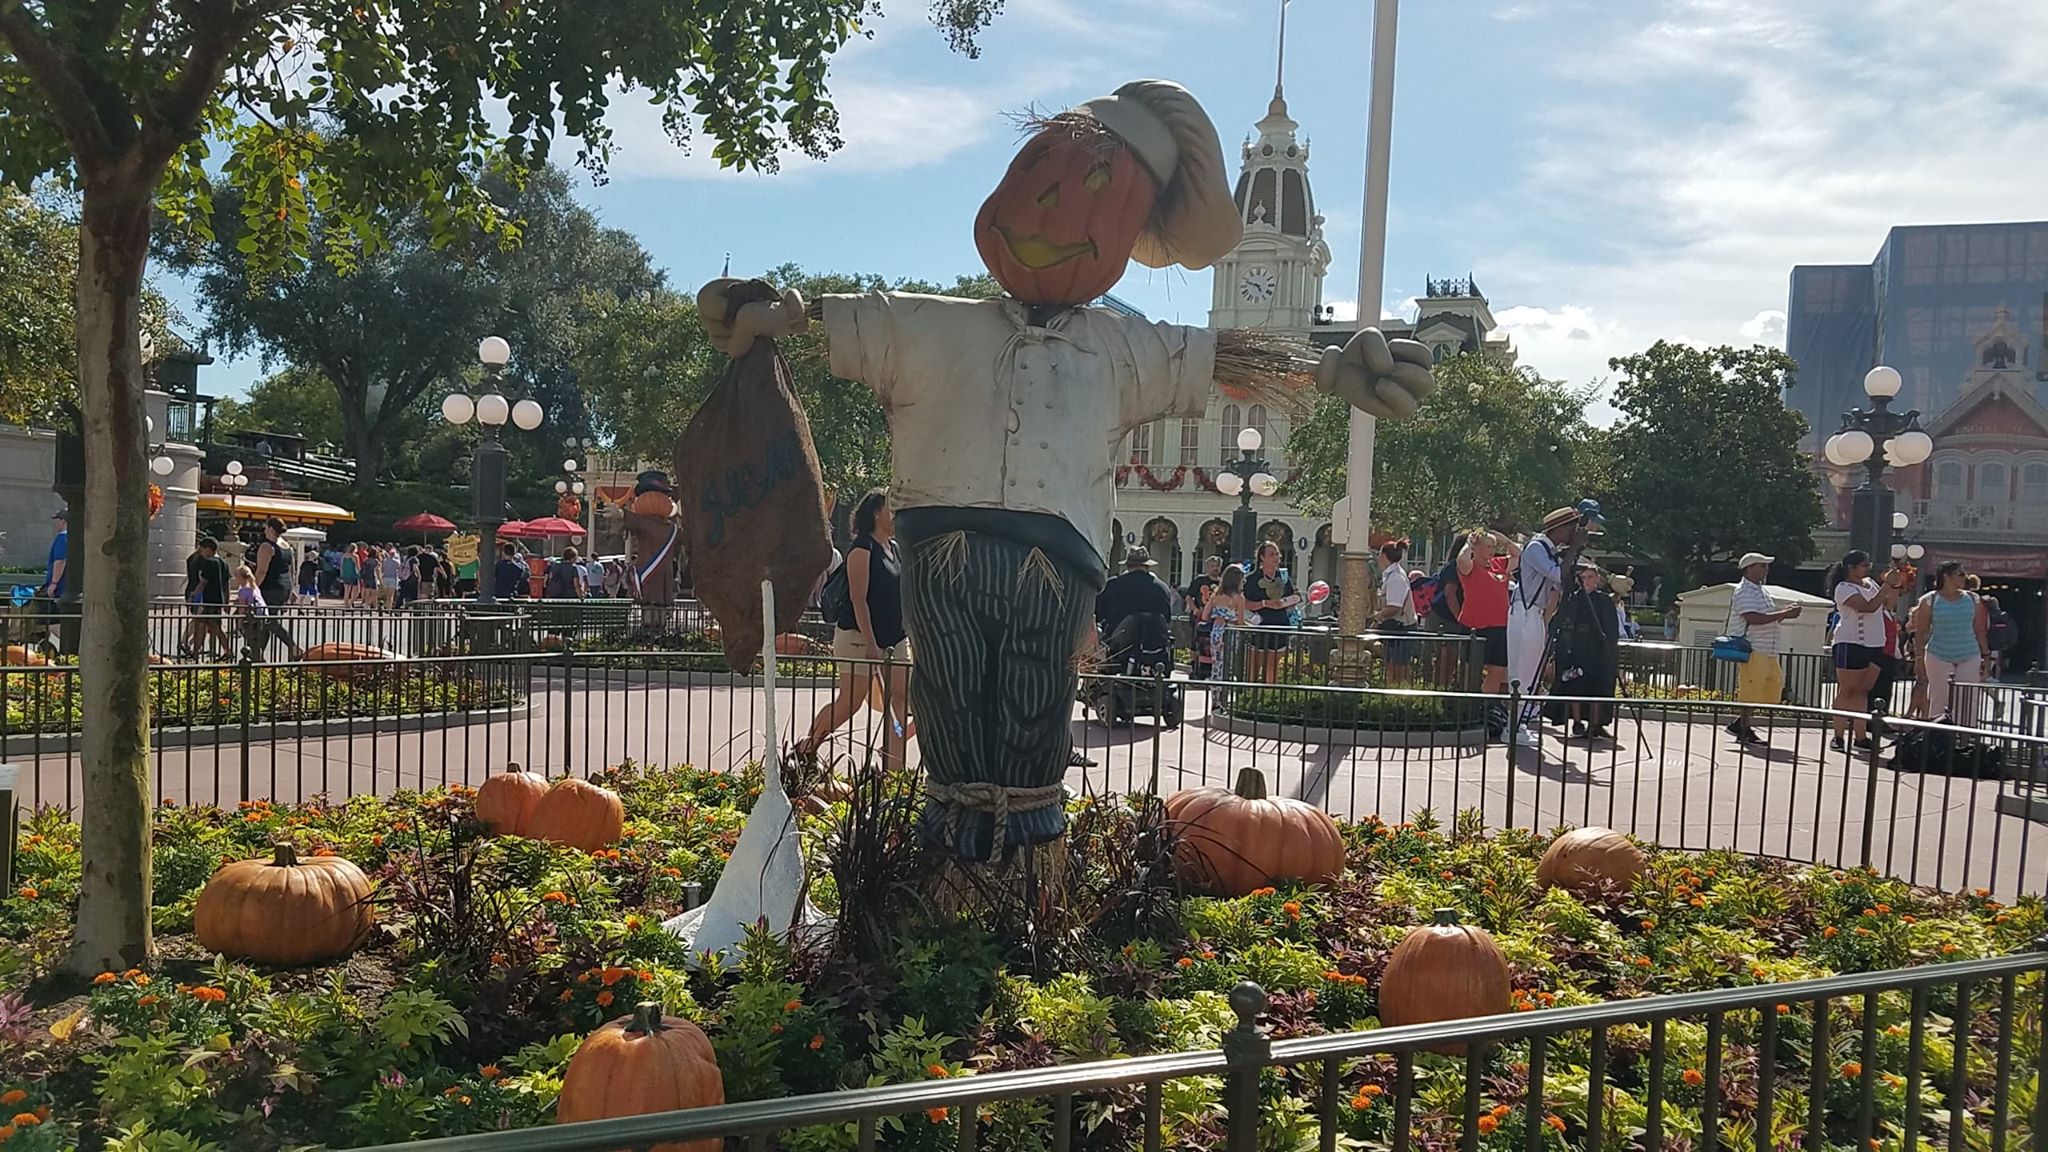 Decorations at Mickey's Not-So-Scary Halloween Party